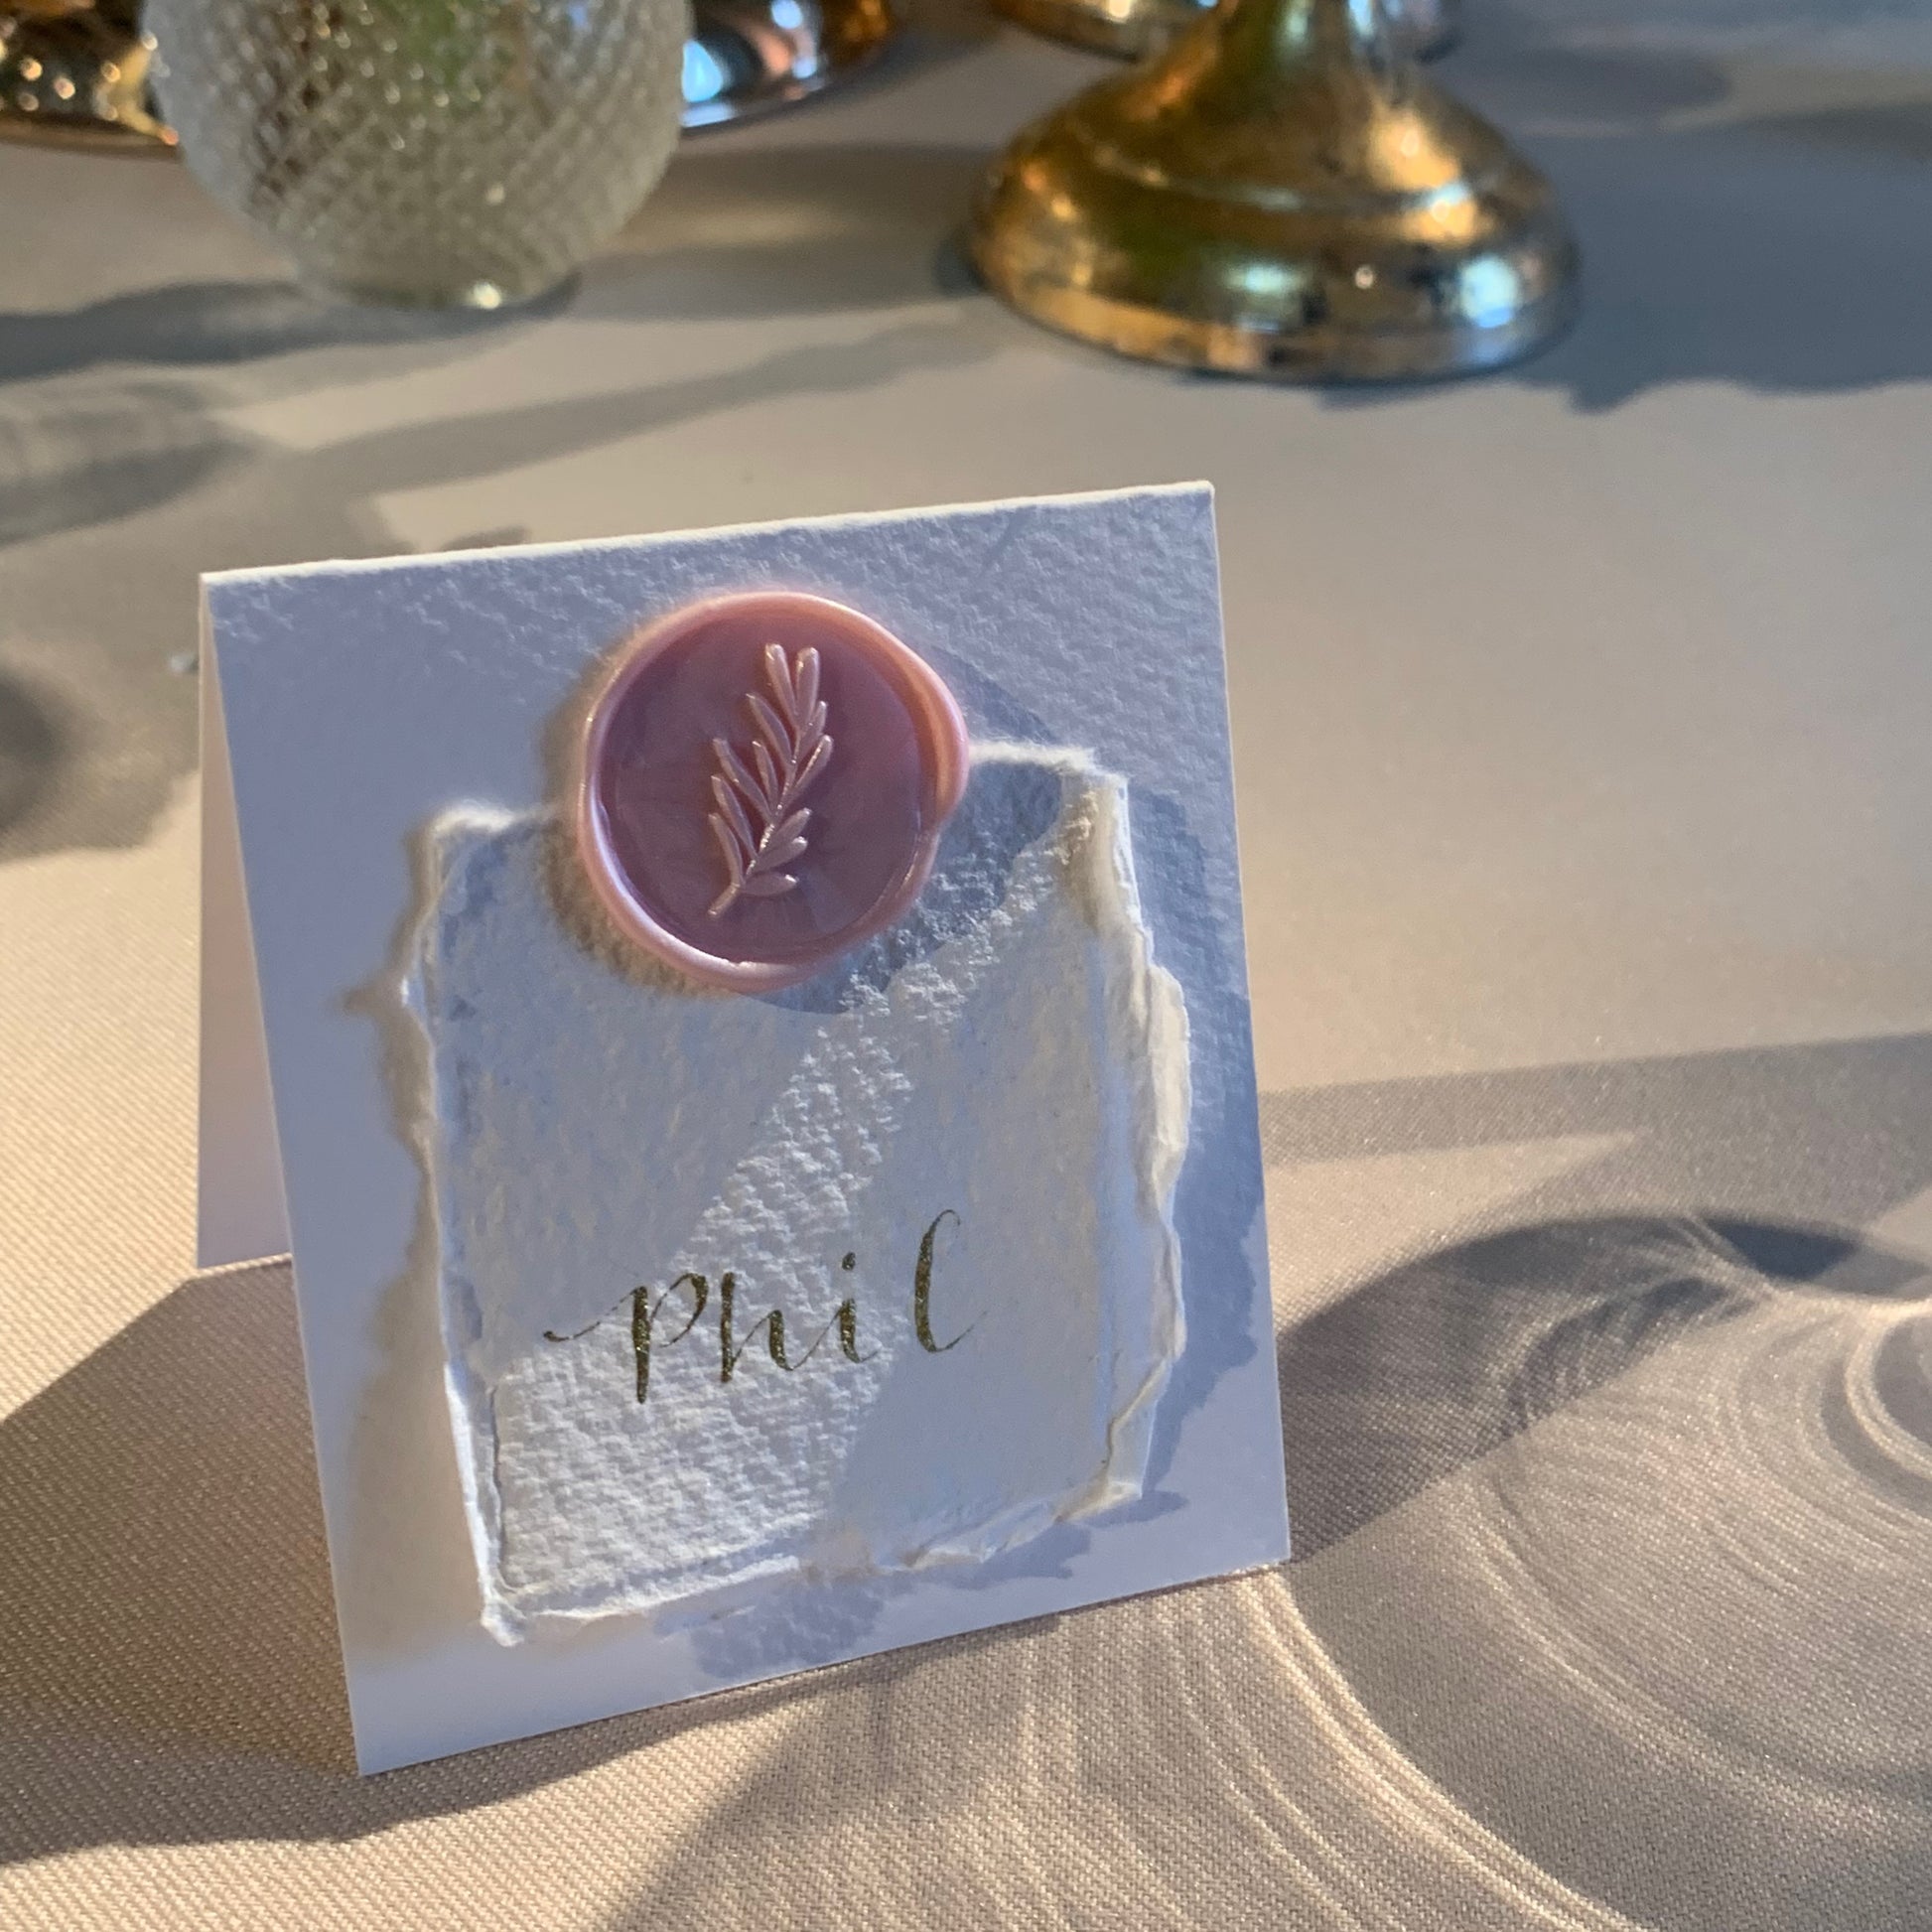 folded place card in white card with pale pink wax seal holding smaller cotton paper with guest name wedding calligraphy 